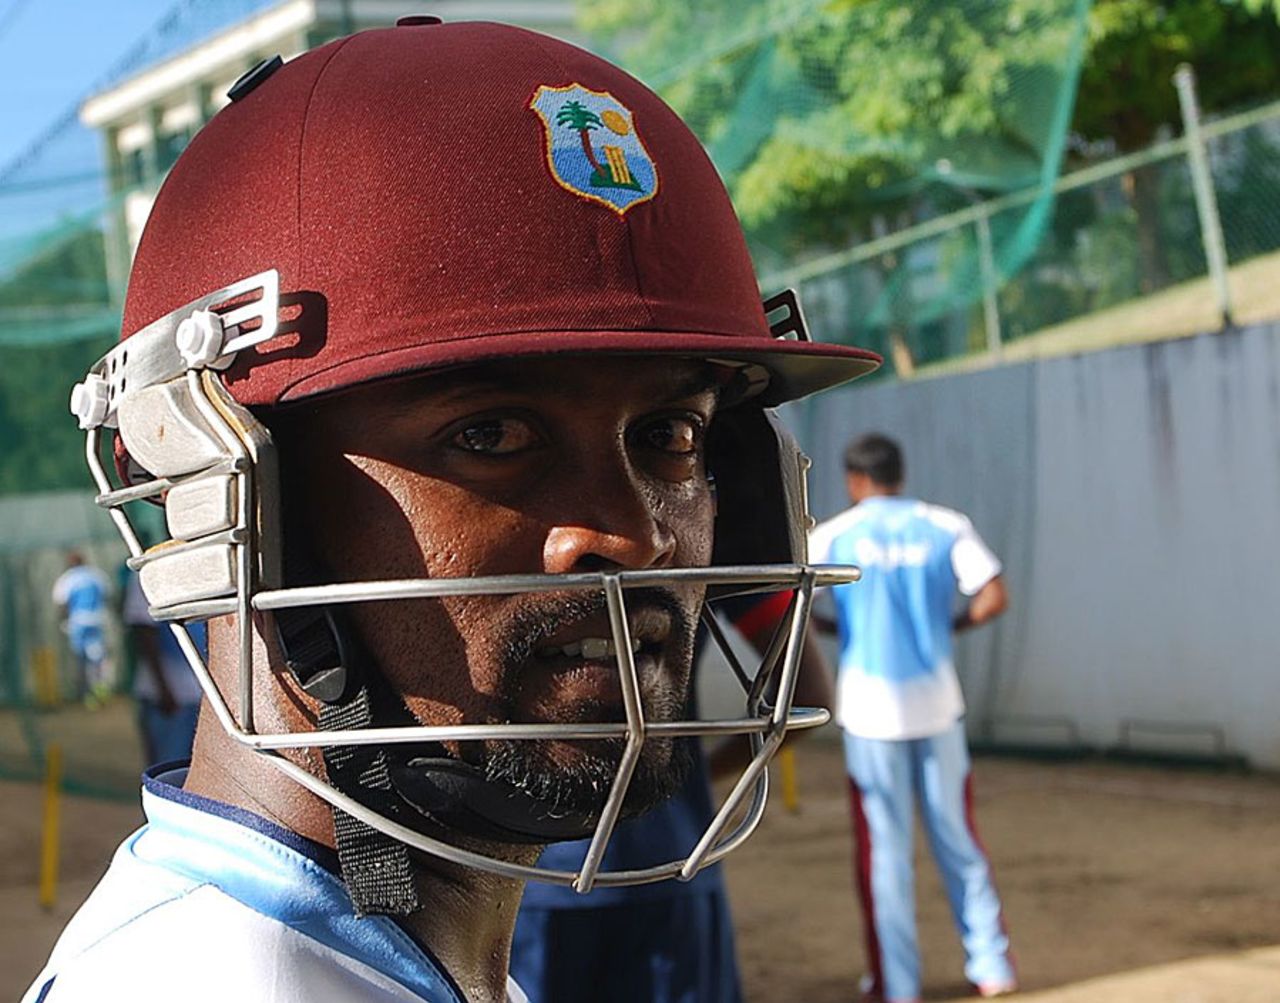 Narsingh Deonarine looks on during a nets session, Barbados, October 29, 2012